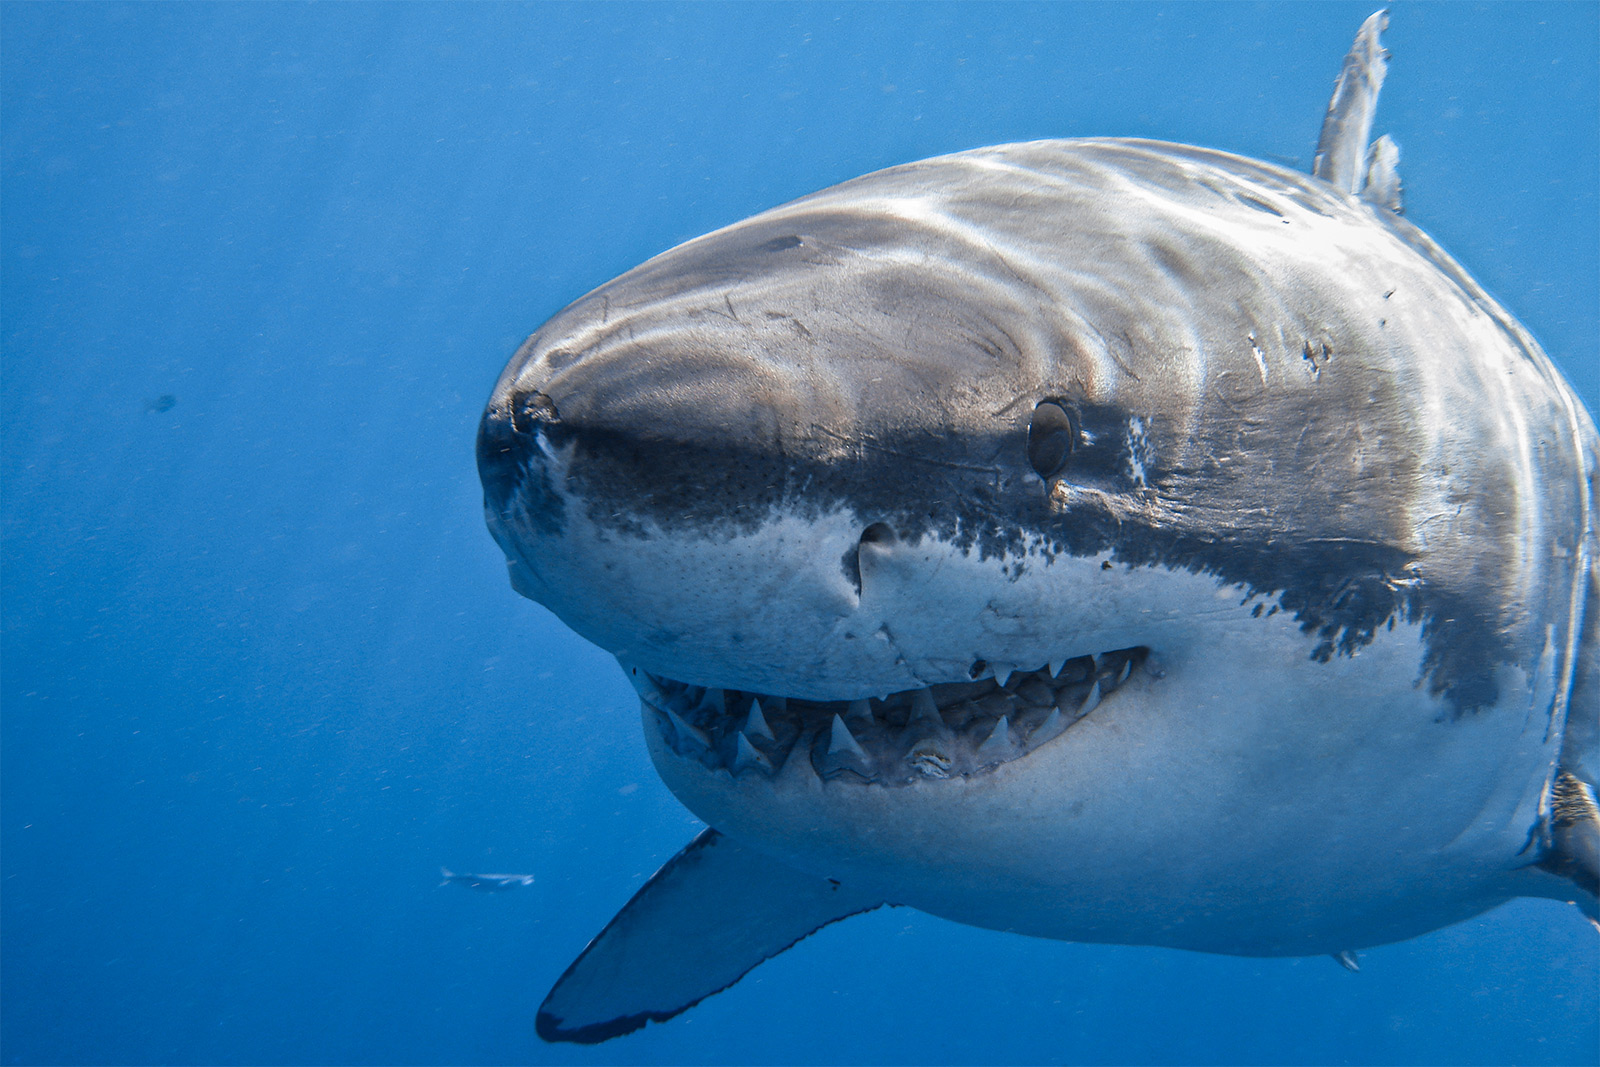 Close-up of a smiling great white shark image